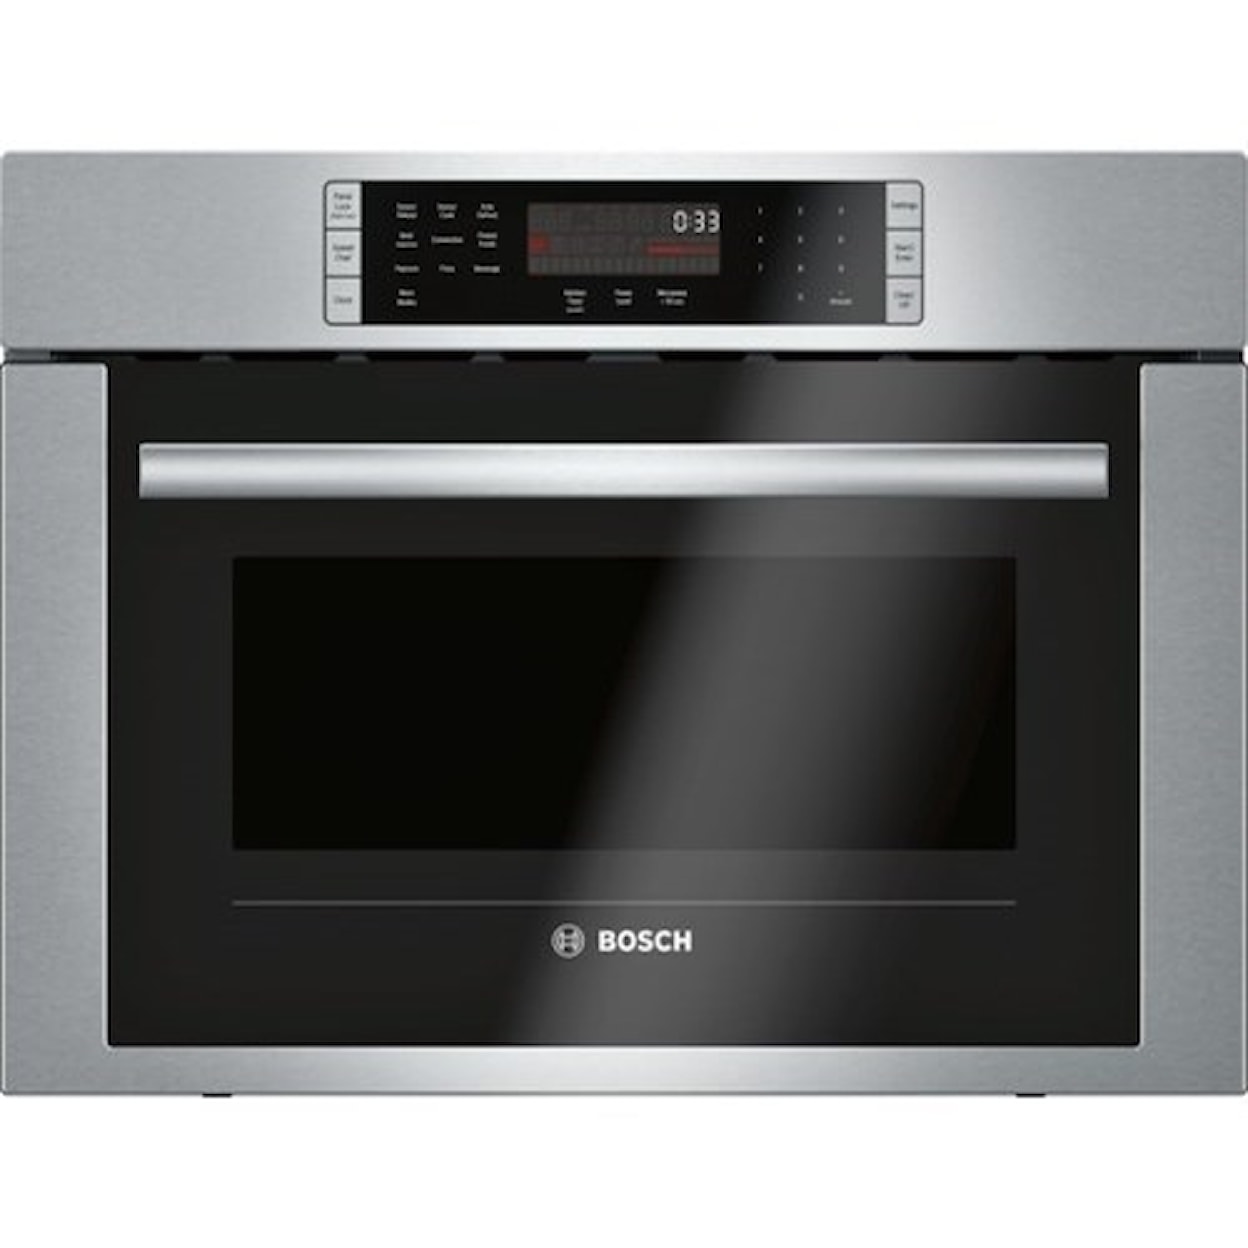 Bosch Microwaves 24" Speed Microwave Oven - 500 Series